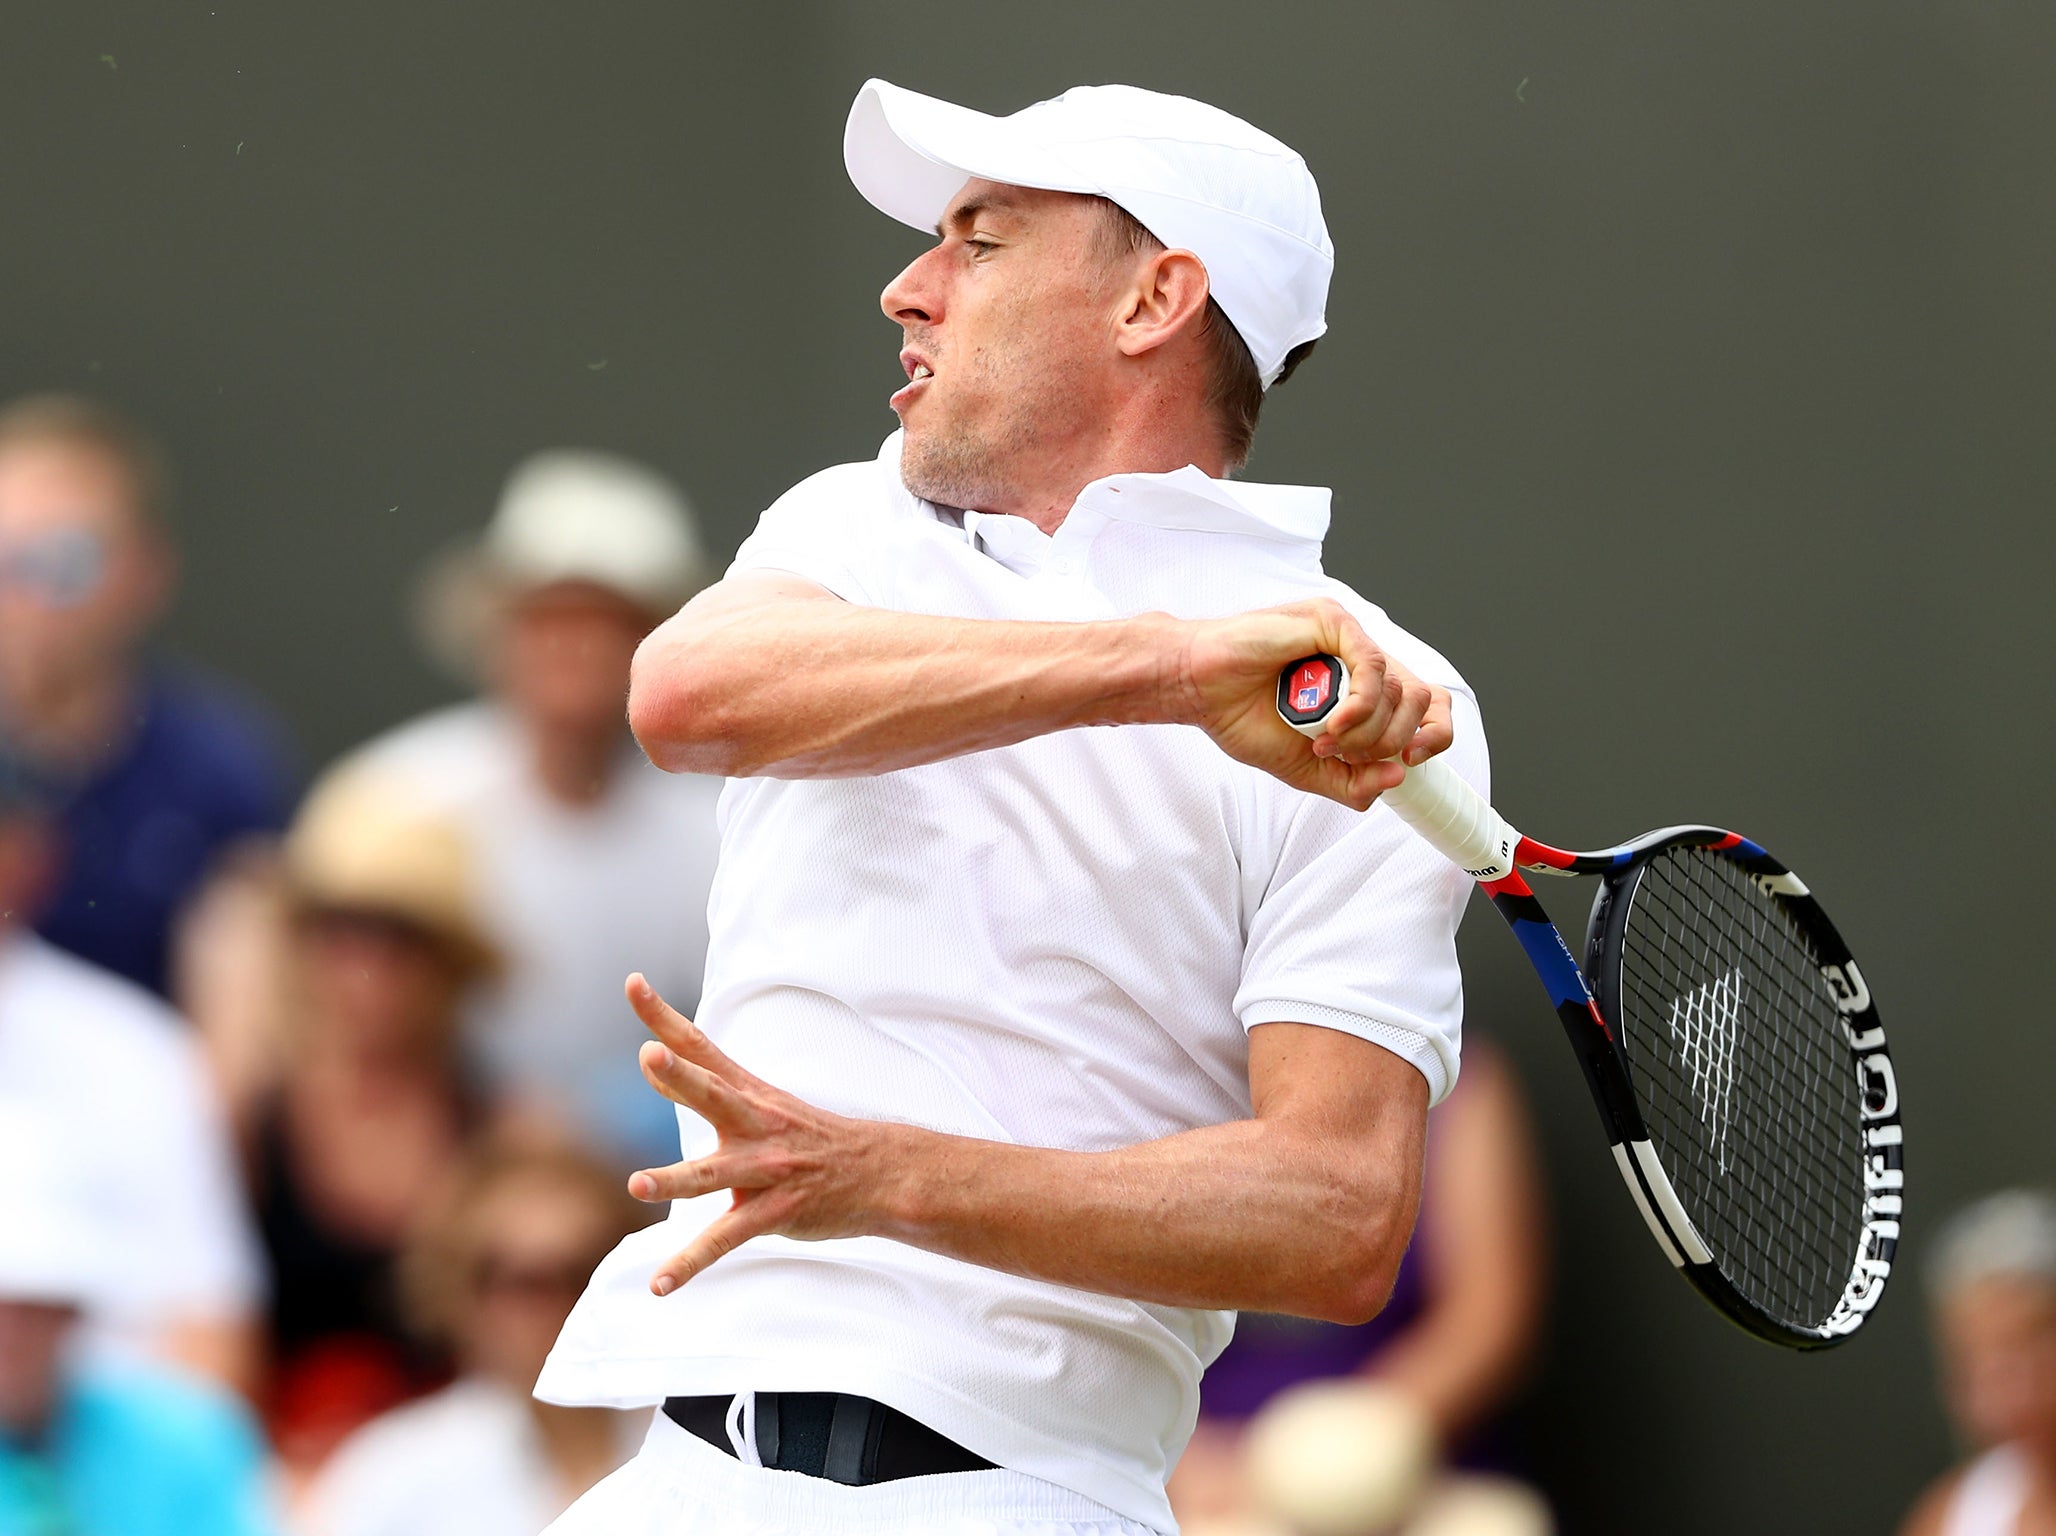 Wimbledon 2018 John Millman receives last-minute emergency underpants delivery ahead of Milos Raonic match The Independent The Independent